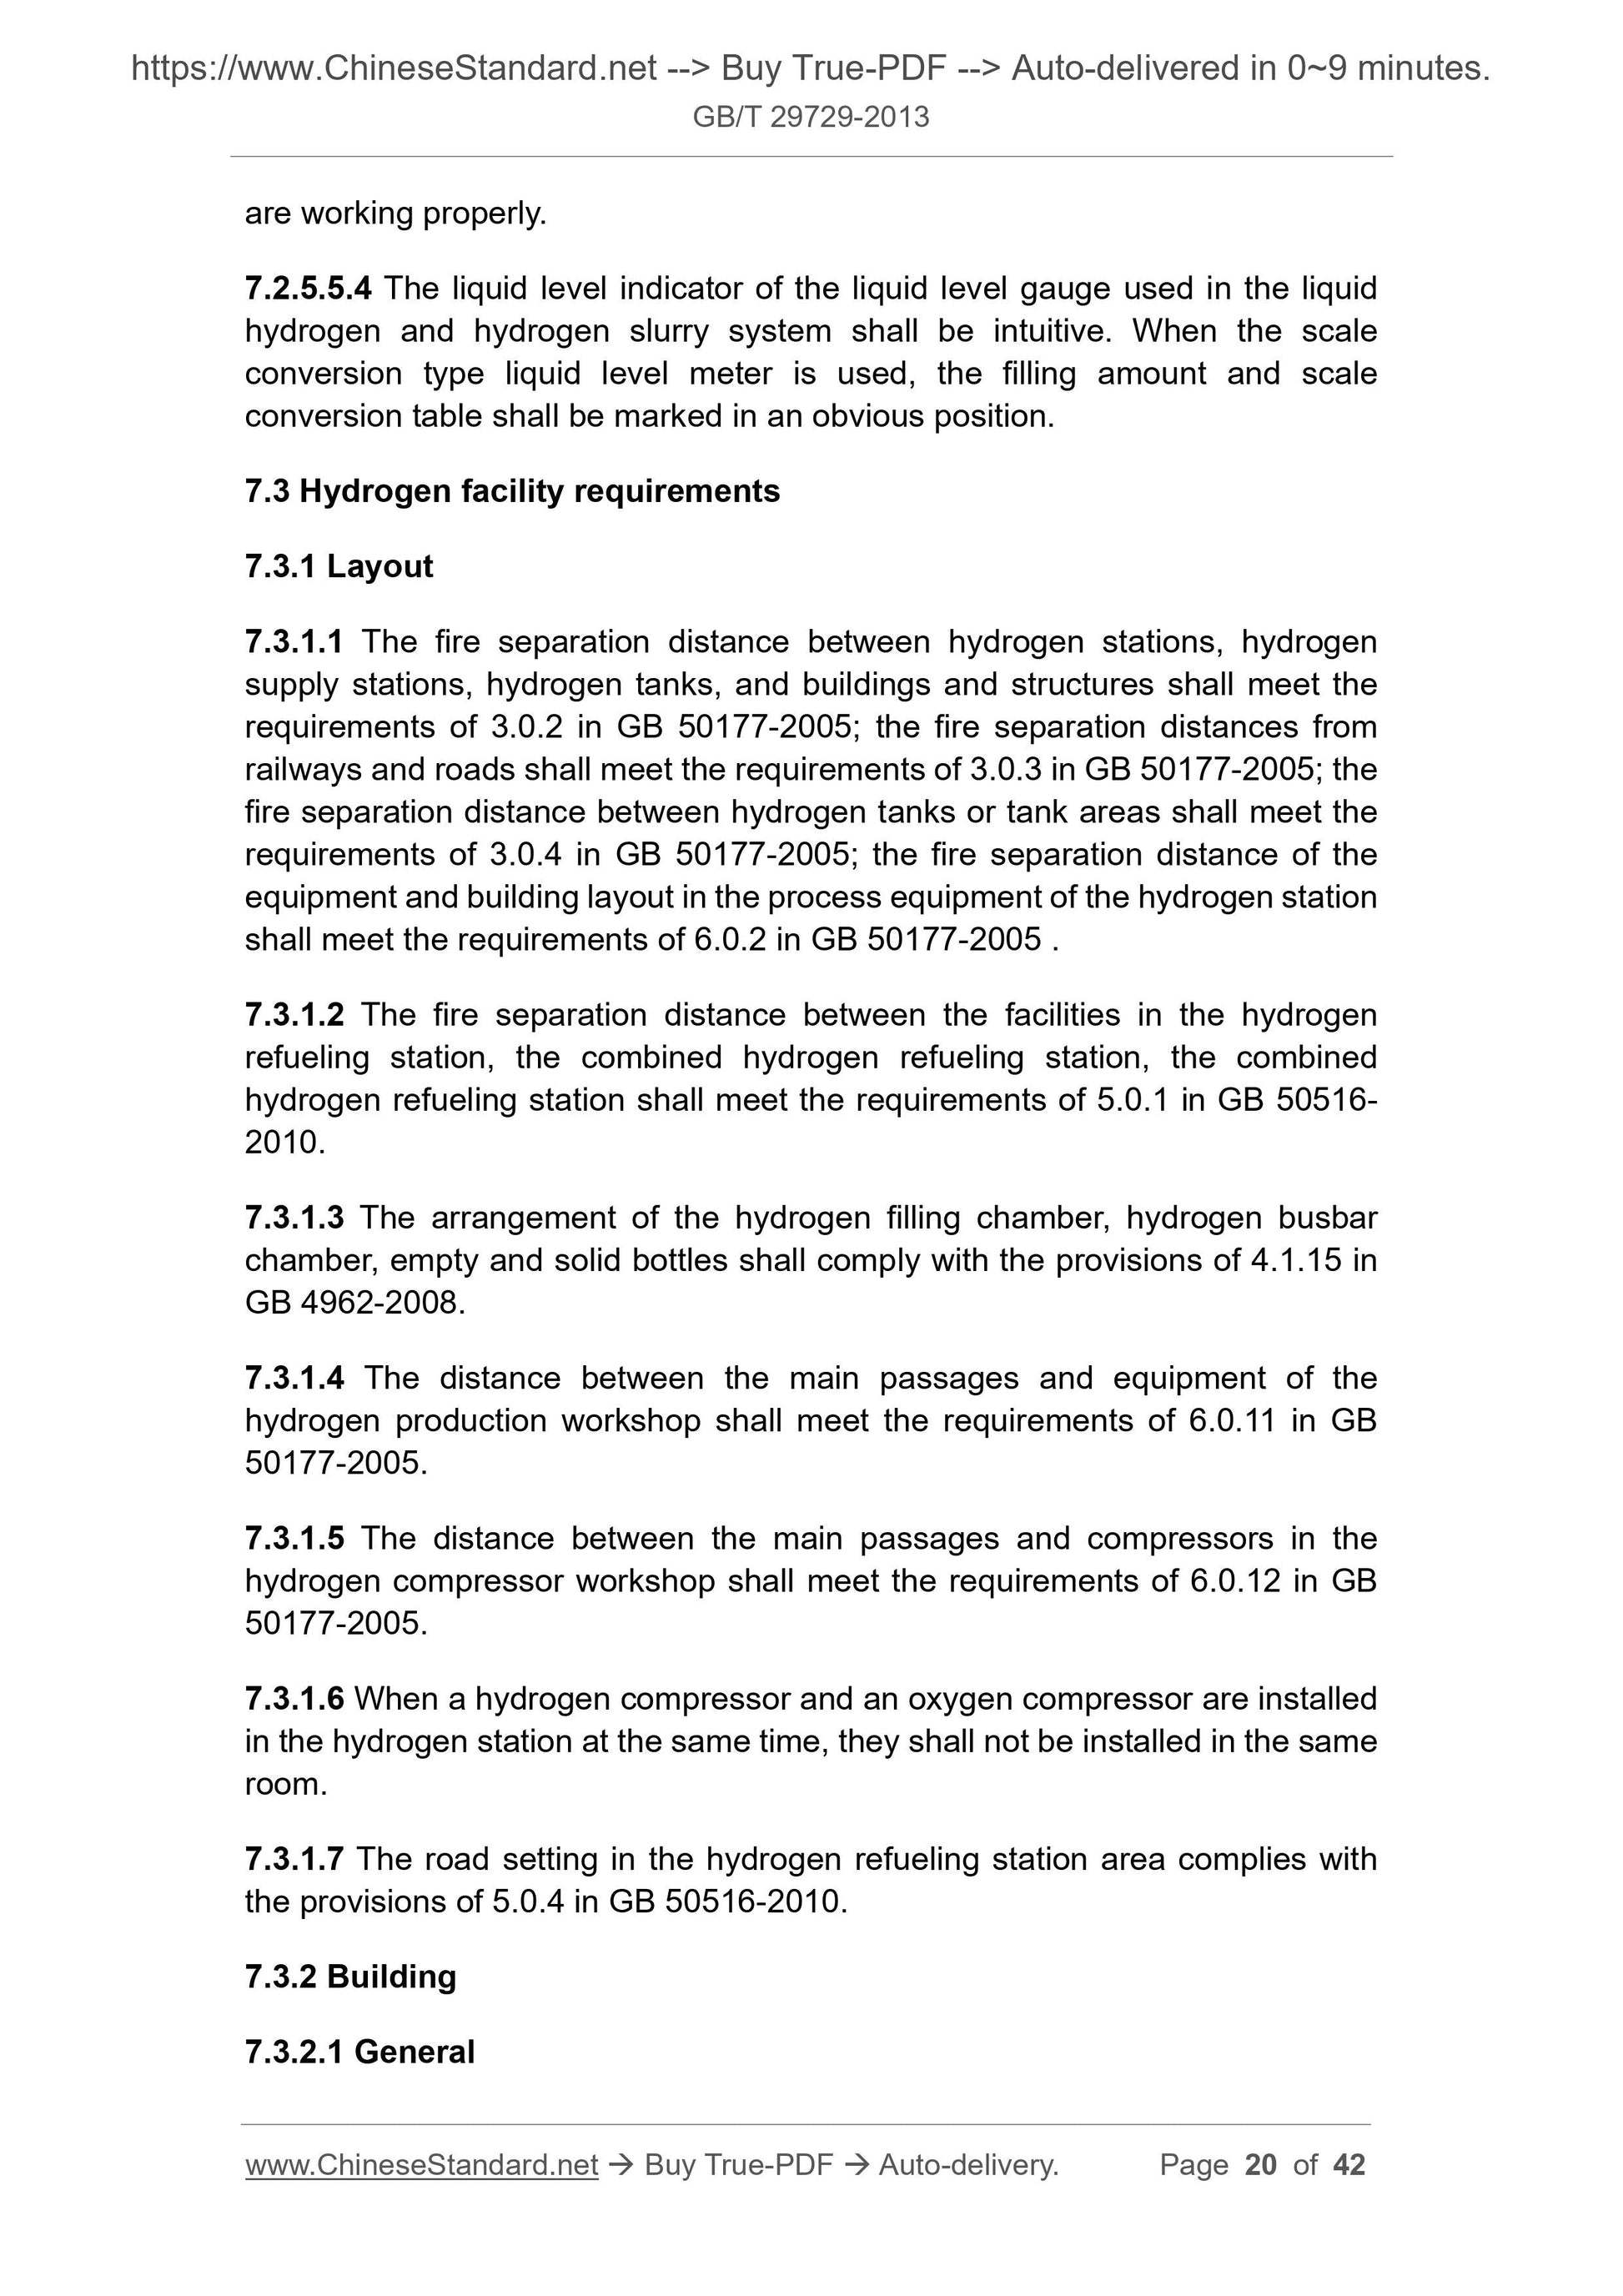 GB/T 29729-2013 Page 11